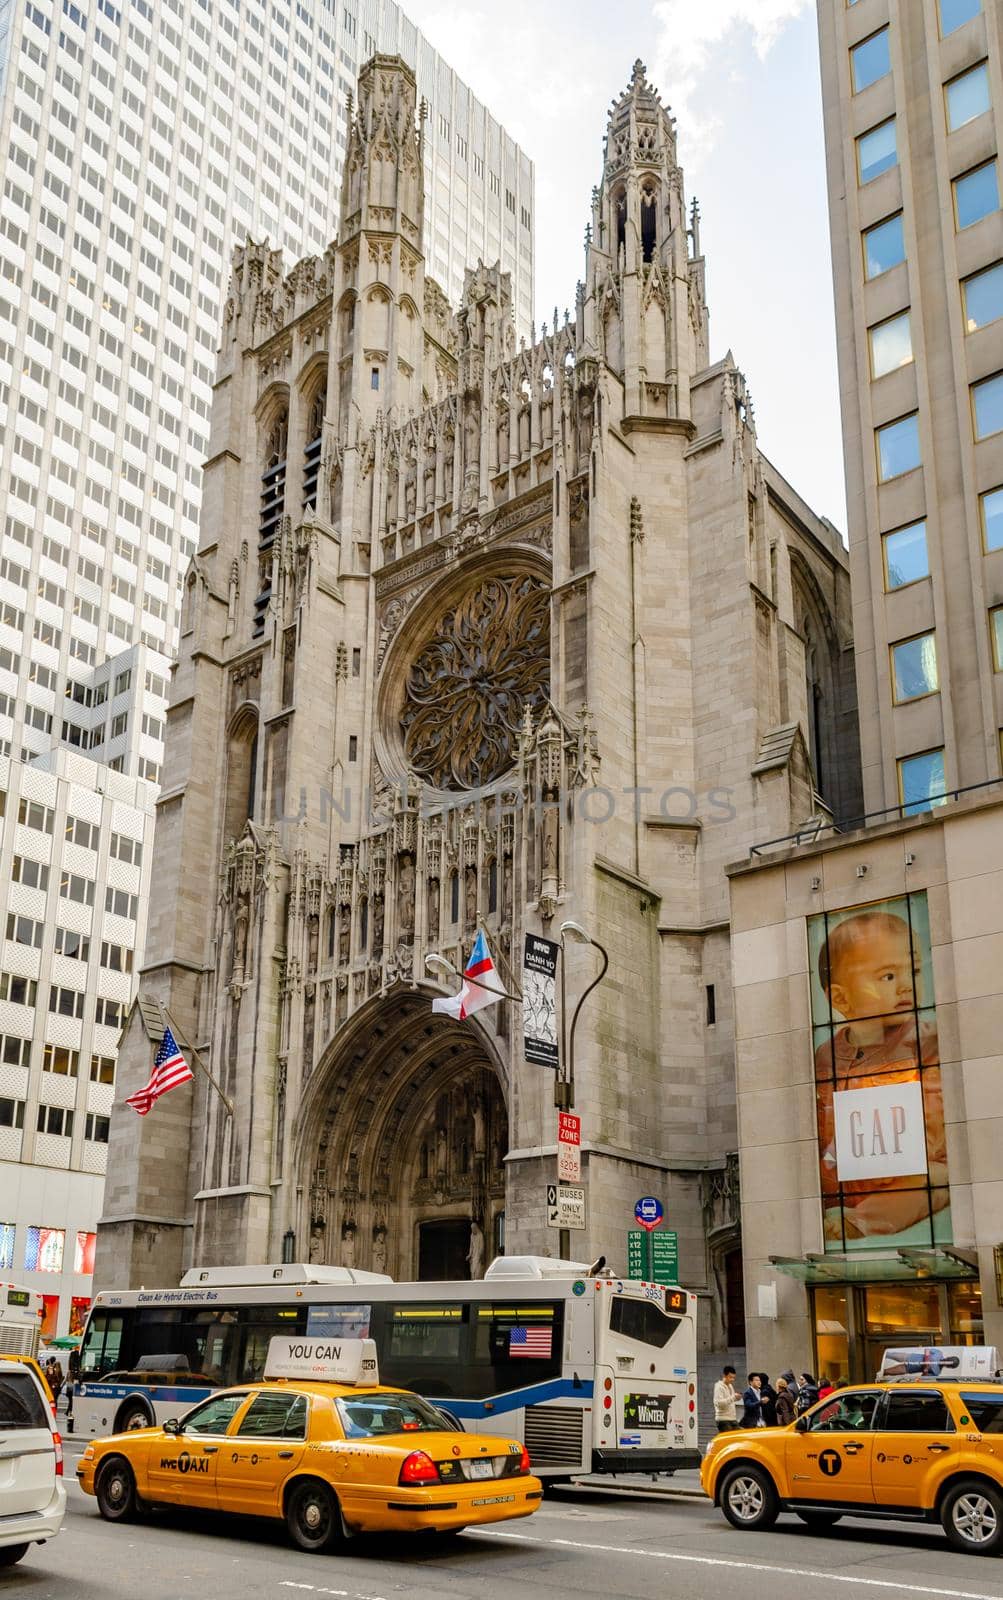 Saint Thomas Church with Bus and yellow taxis in front, GAP Store, Manhattan, New York City during winter day, vertical